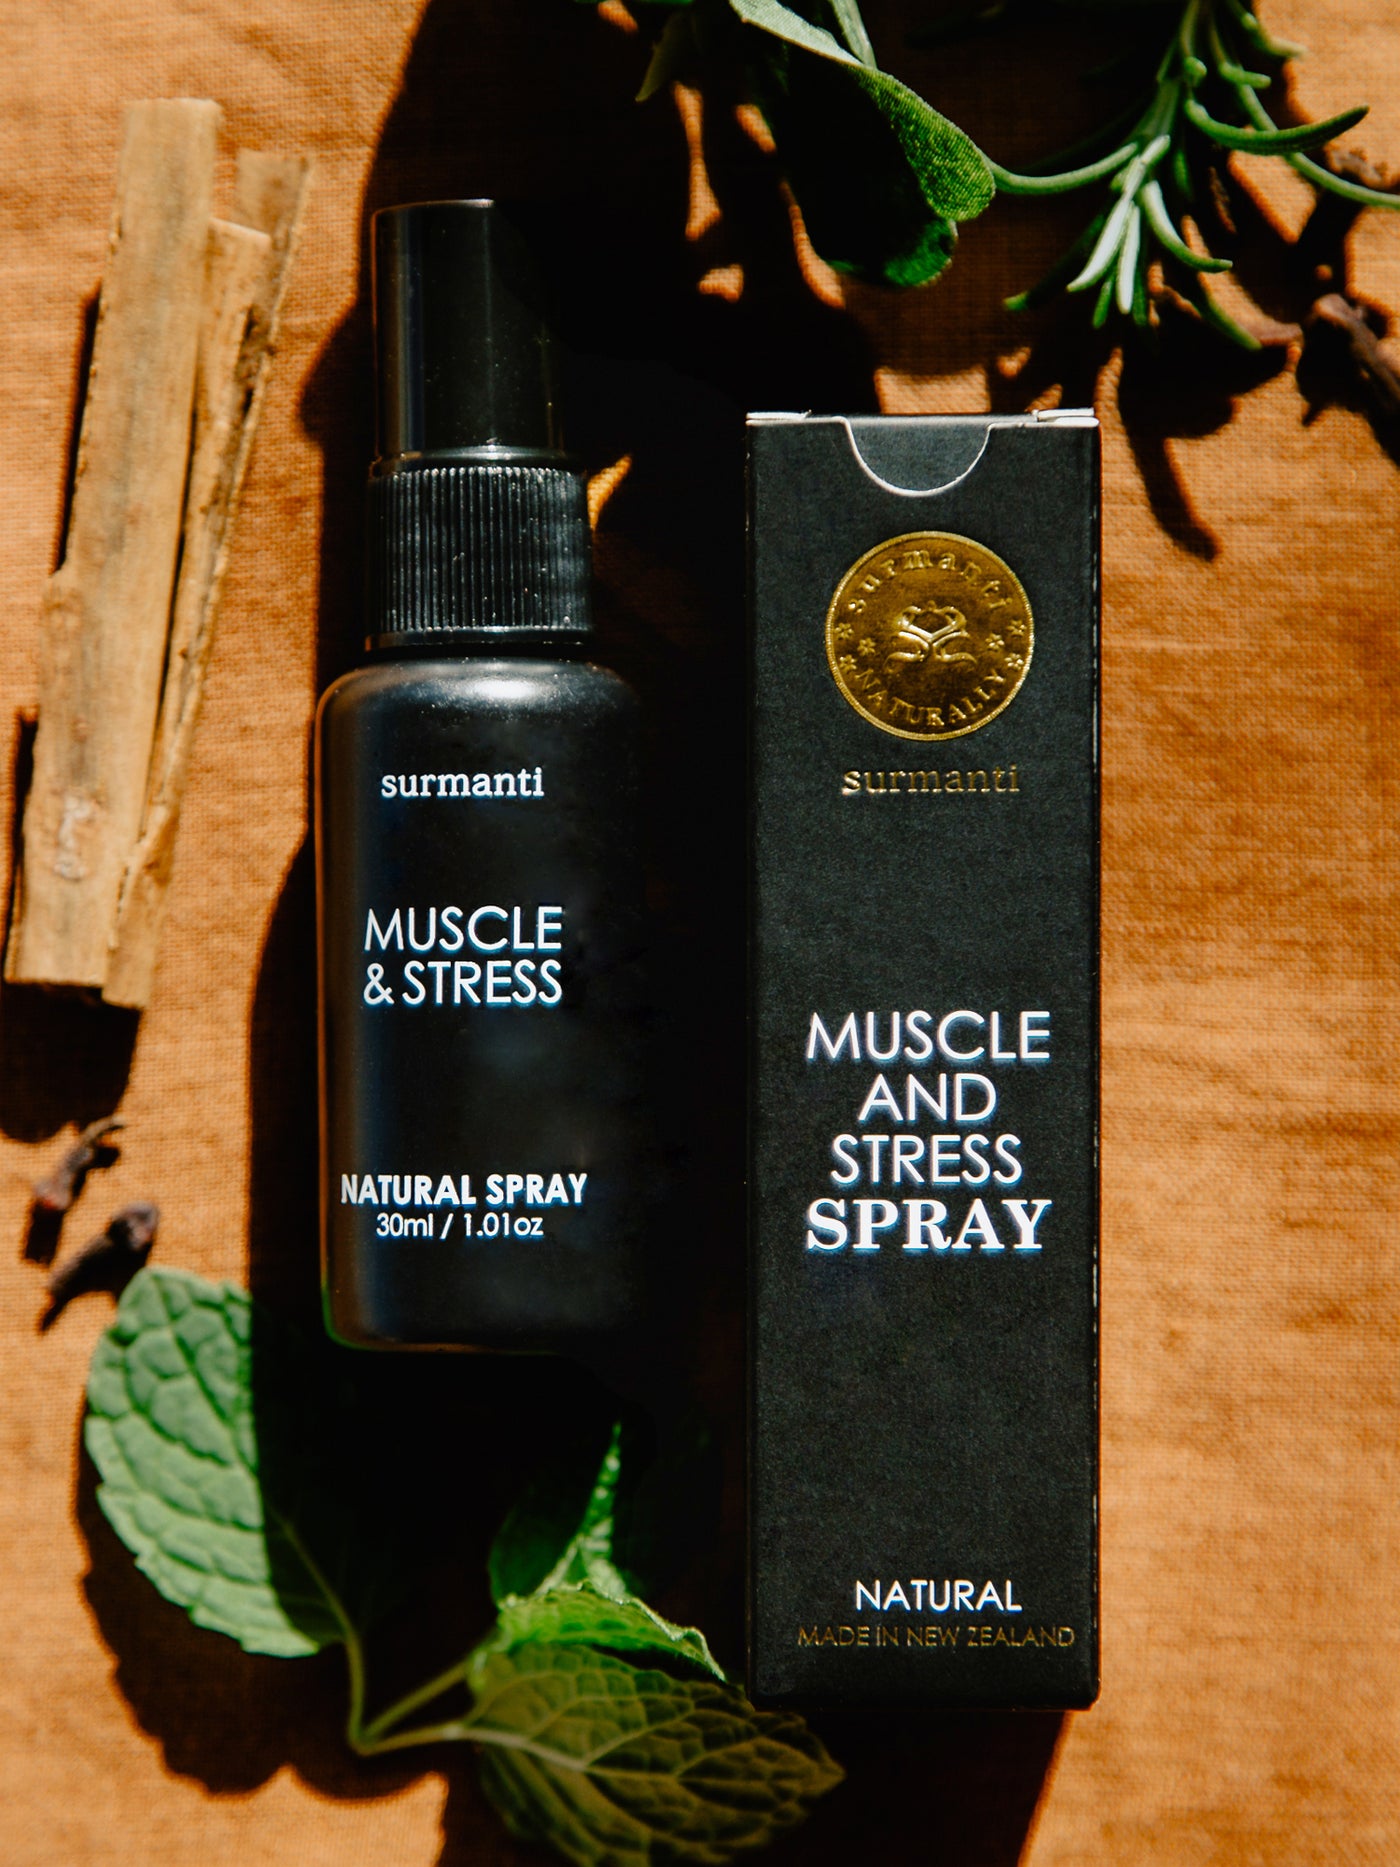 Muscle & Stress Gift Set - Surmanti - Made In New Zealand